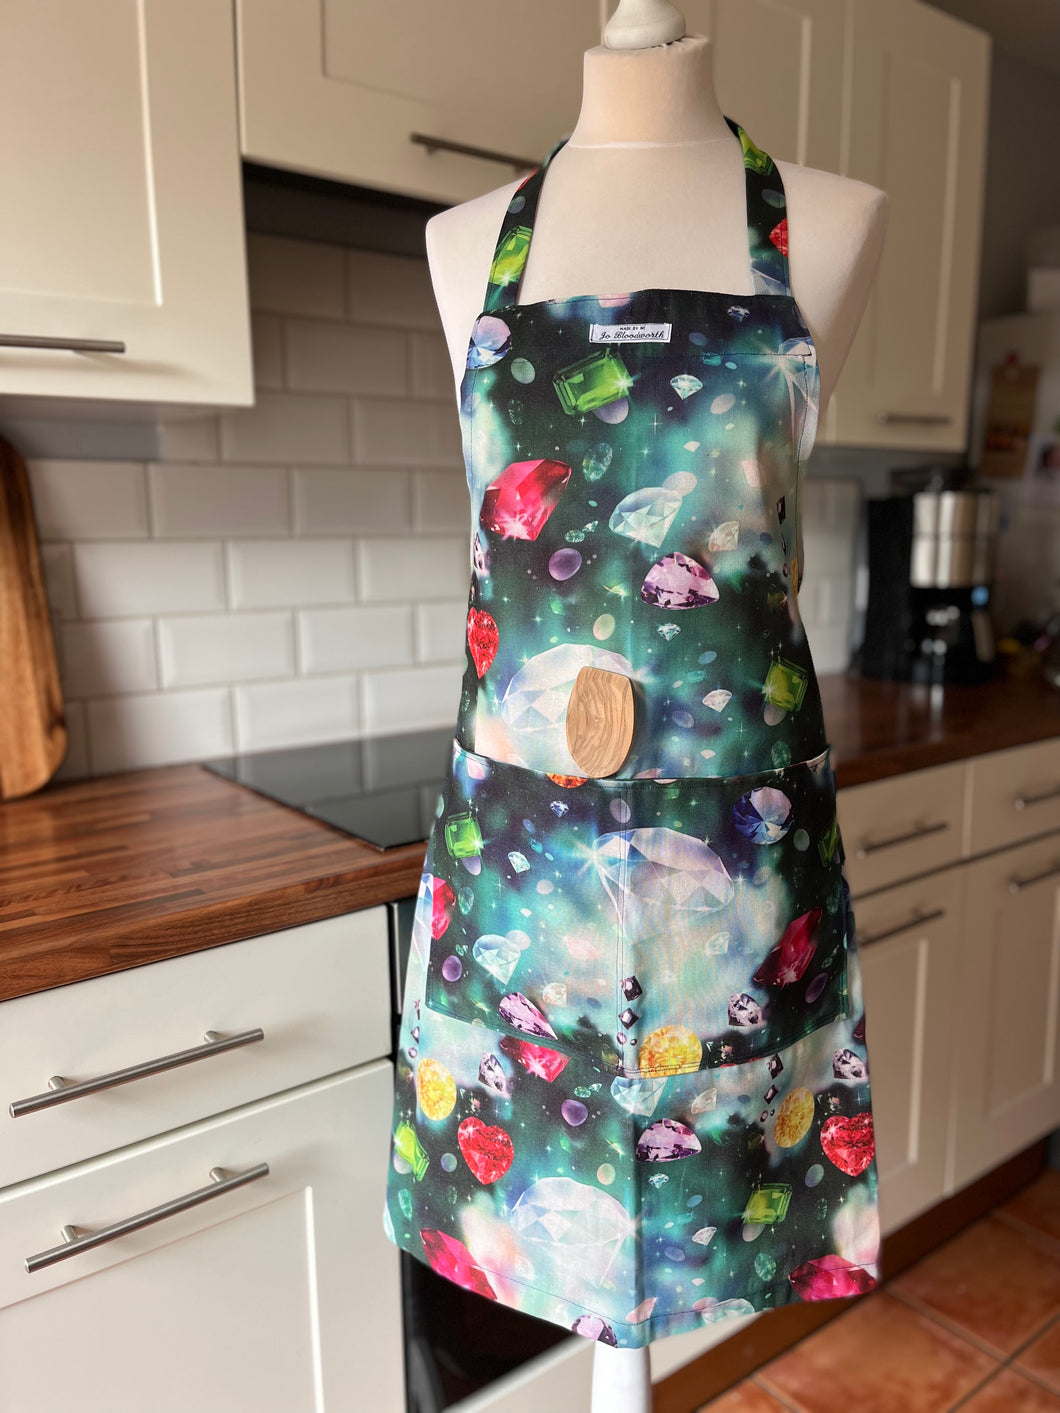 Intergalactic Gem Double pocket Apron MADE IN SHROPSHIRE